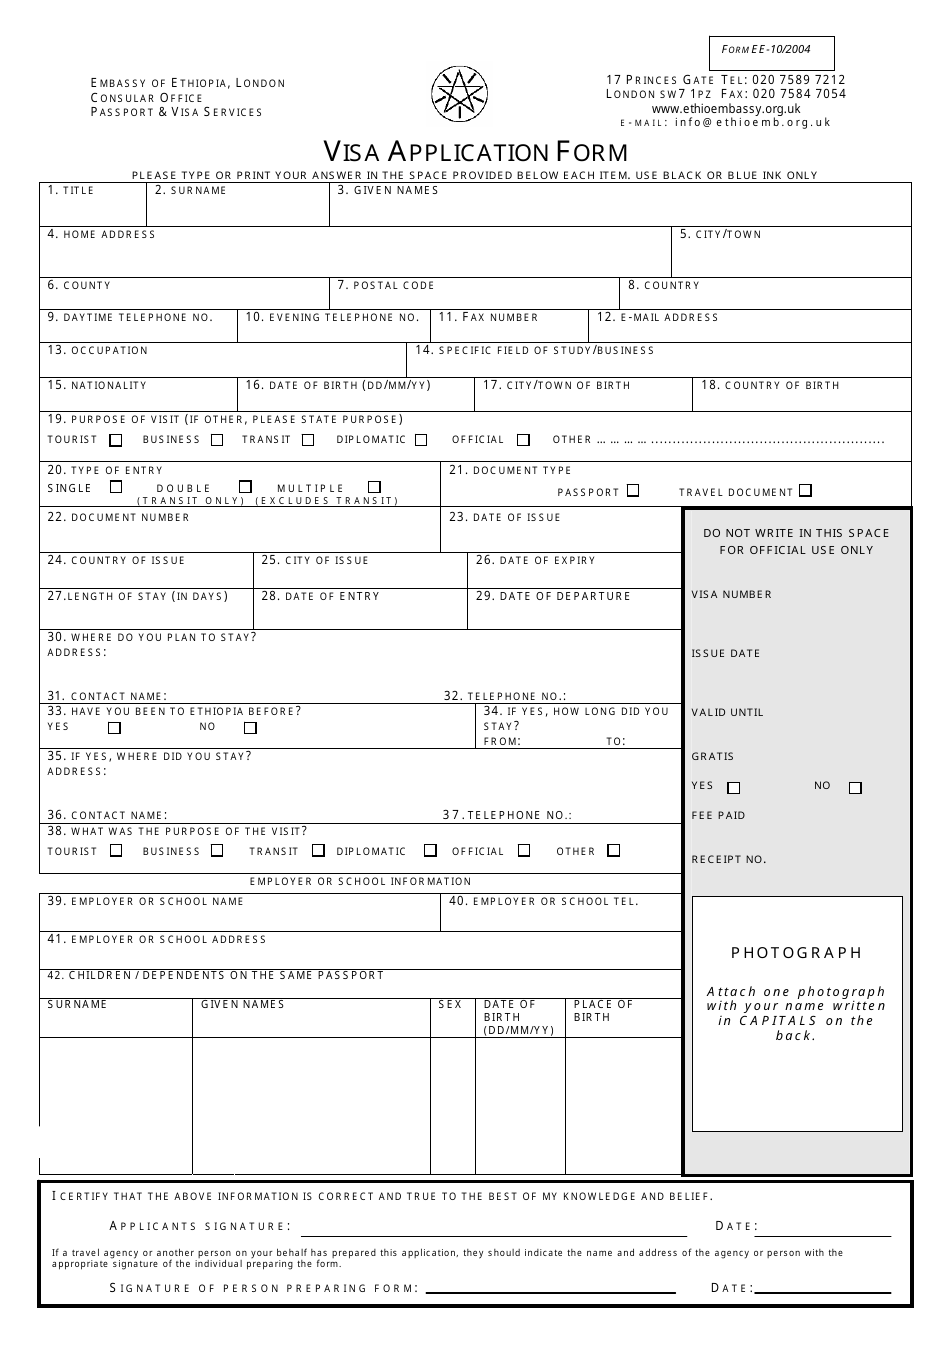 Form EE-10 / 2004 Ethiopia Visa Application Form - Embassy of Ethiopia - Greater London, United Kingdom, Page 1